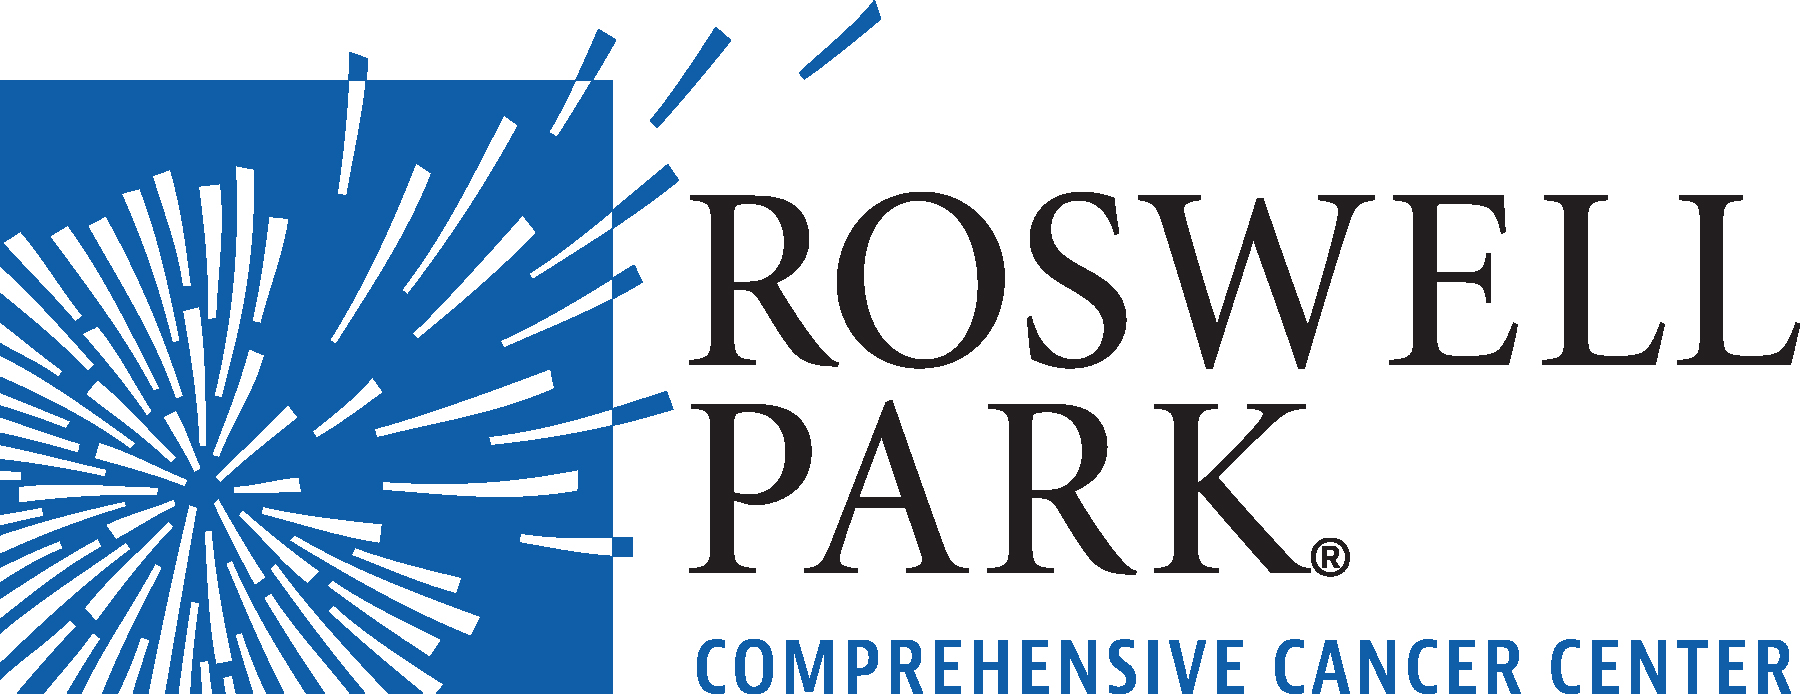 Roswell Park Team Reports New Insights on Treatment of Metastatic Breast Cancer